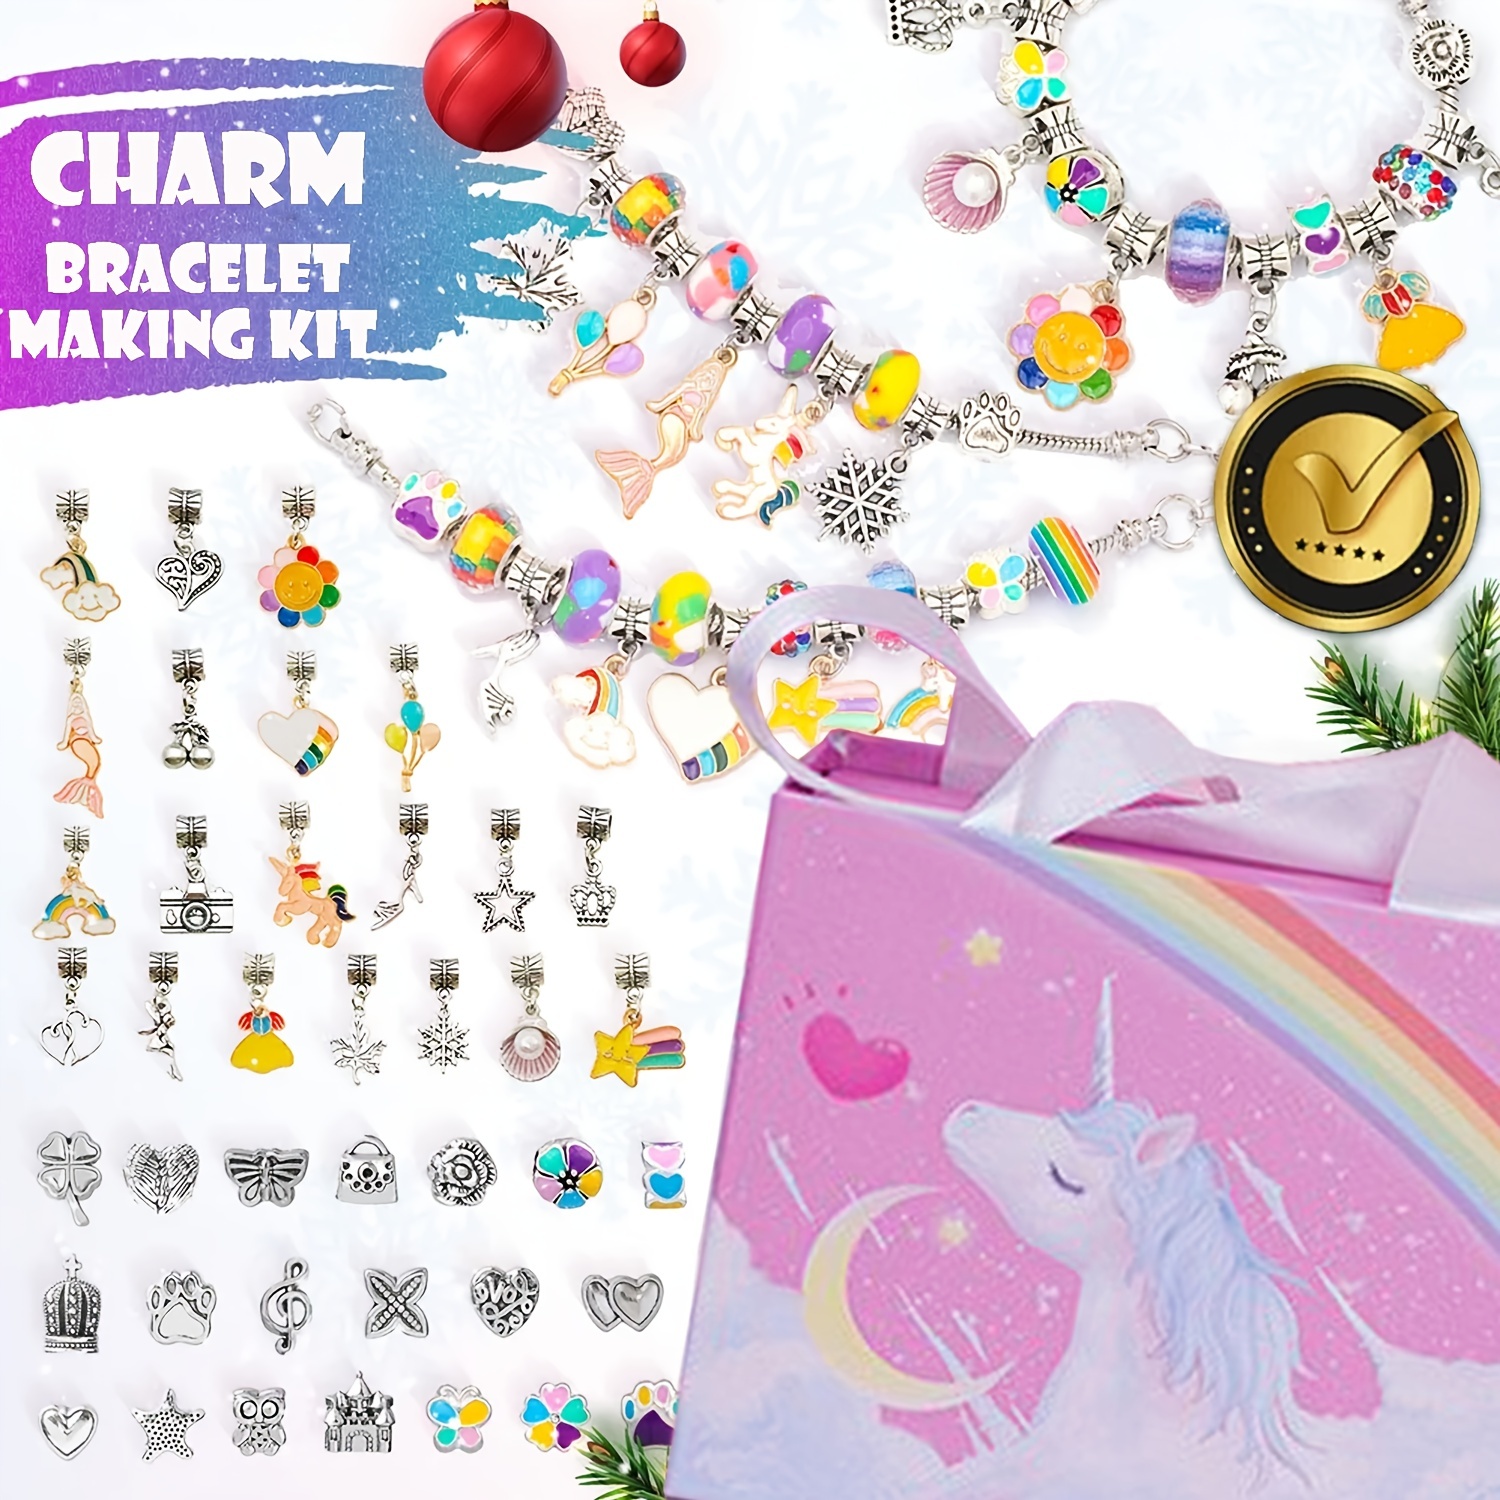 Charm Bracelet Making Kit Jewelry Making Supplies Beads Unicorn Mermaid  Crafts Gifts Set For Girls Teens Age 8 12, High-quality & Affordable